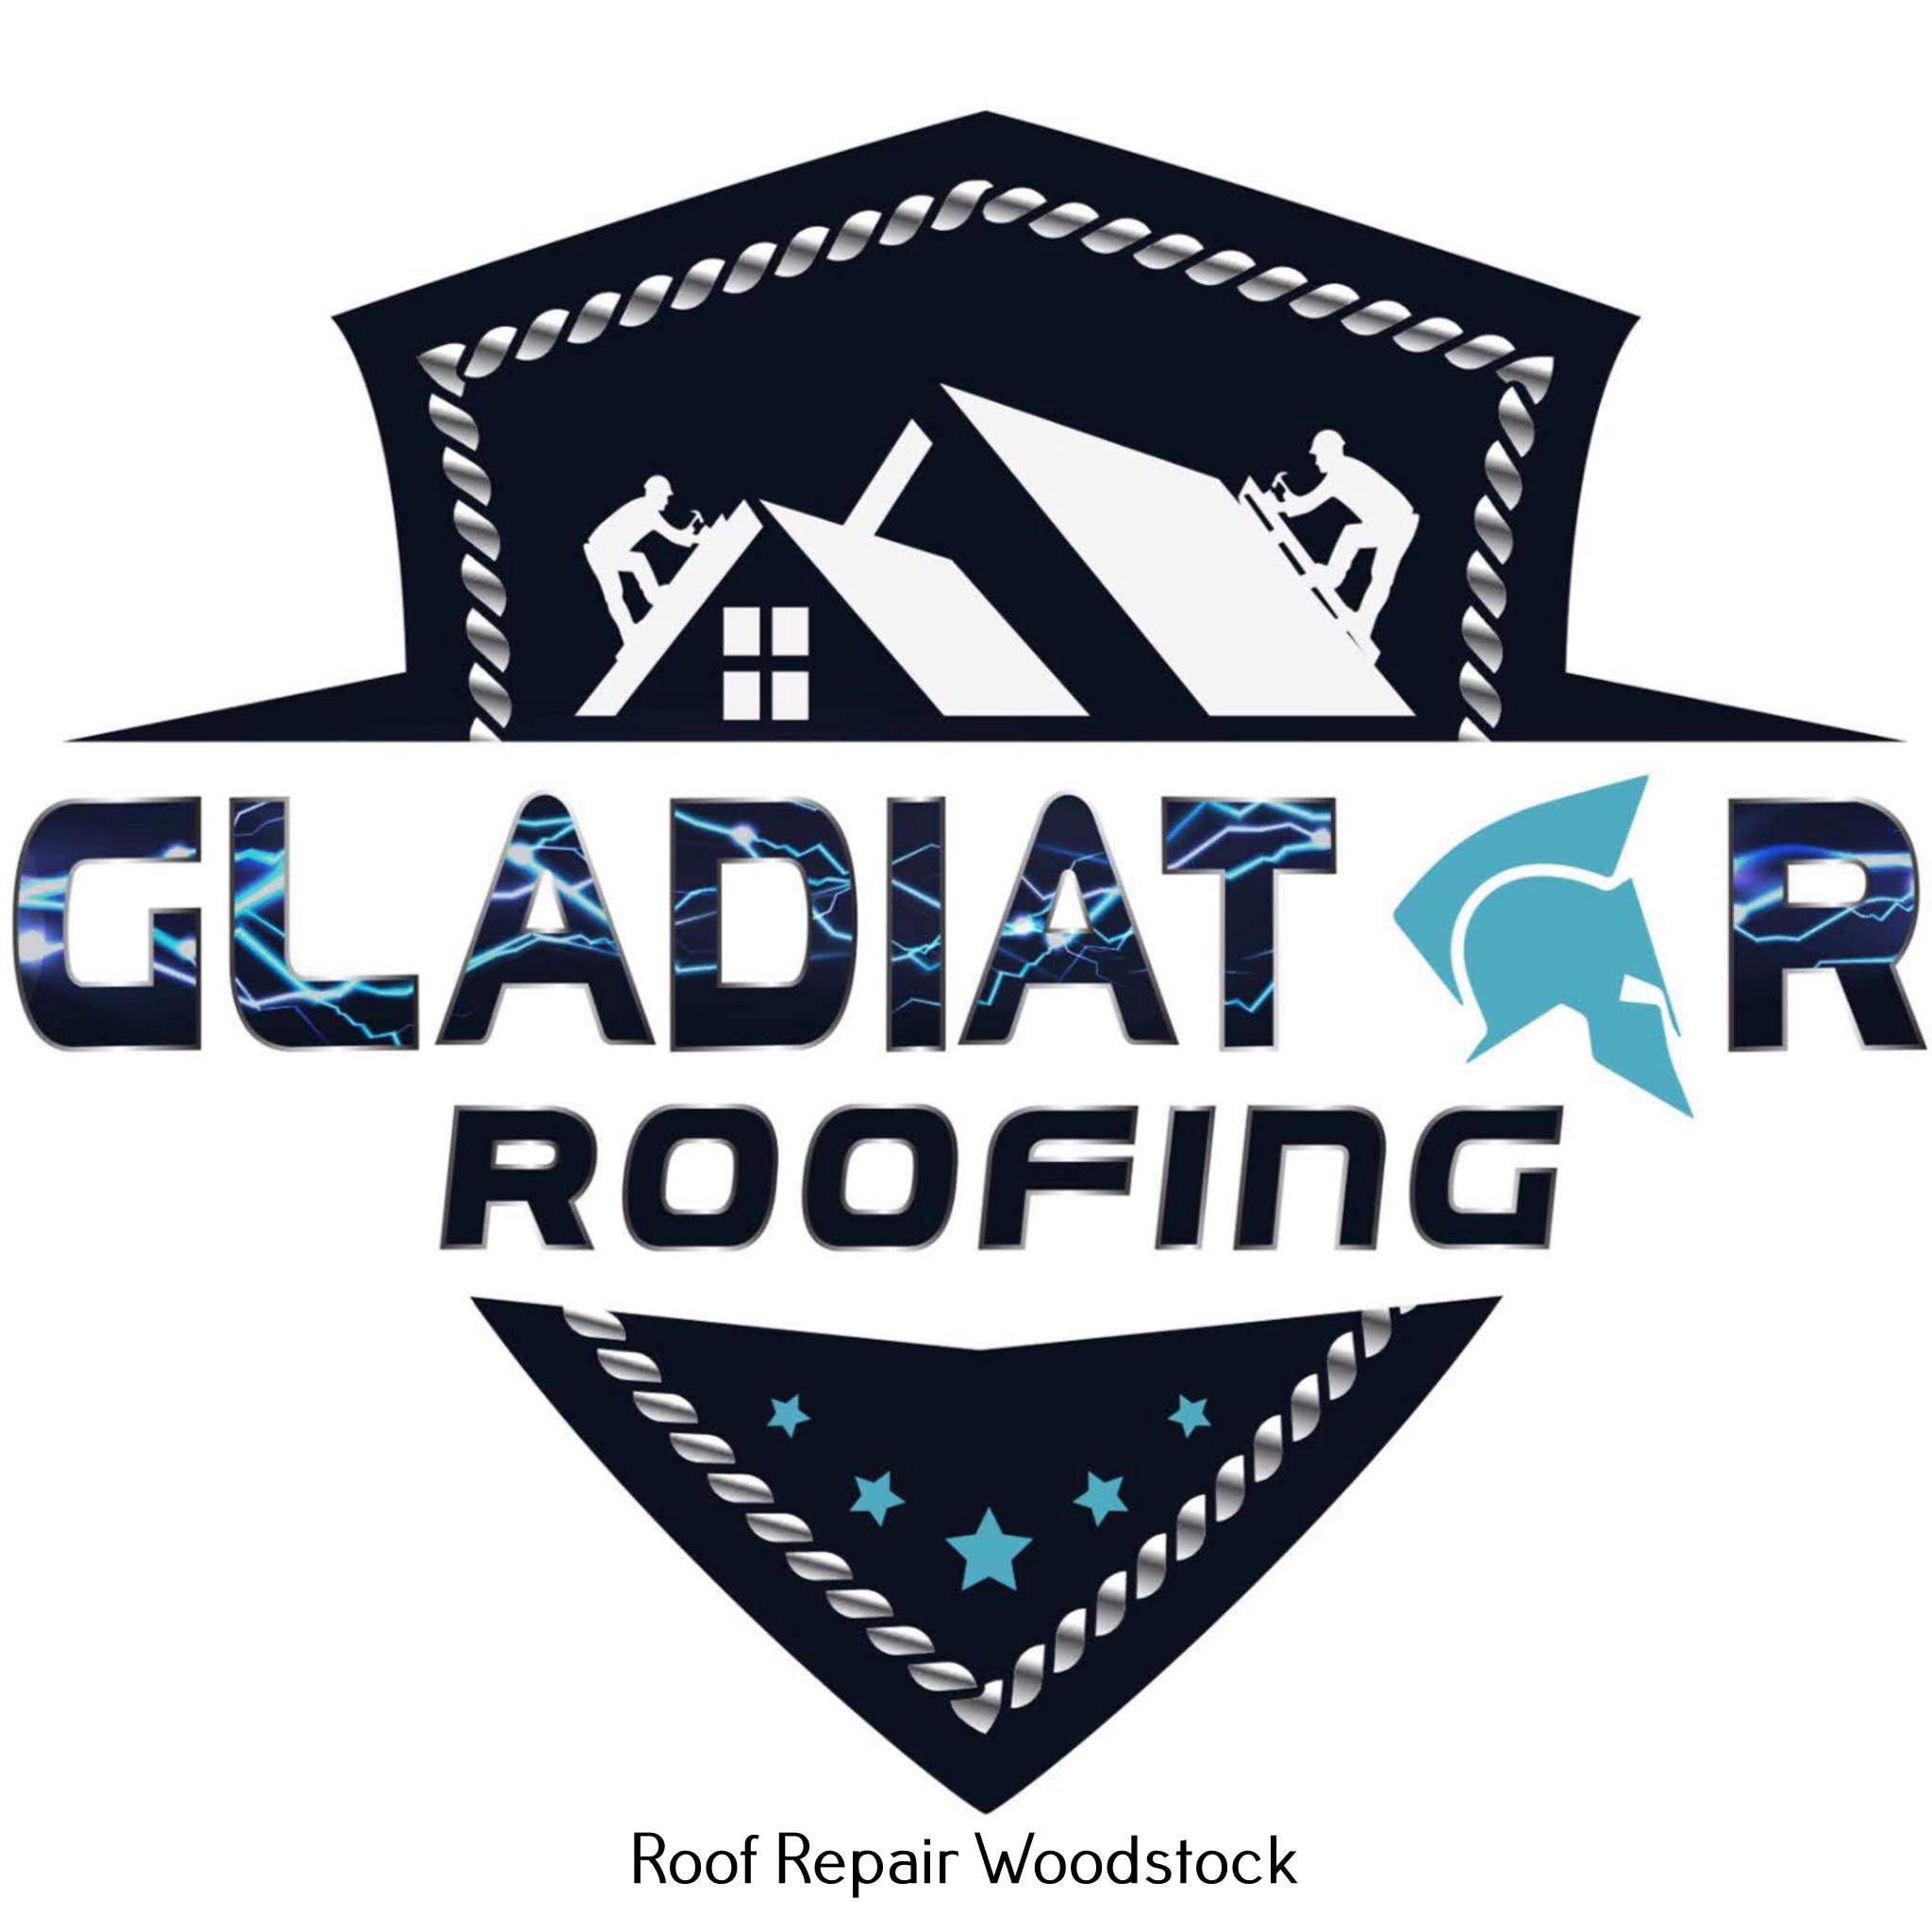 Improved Roofing Structure and Performance by Experienced Roofing Contractors